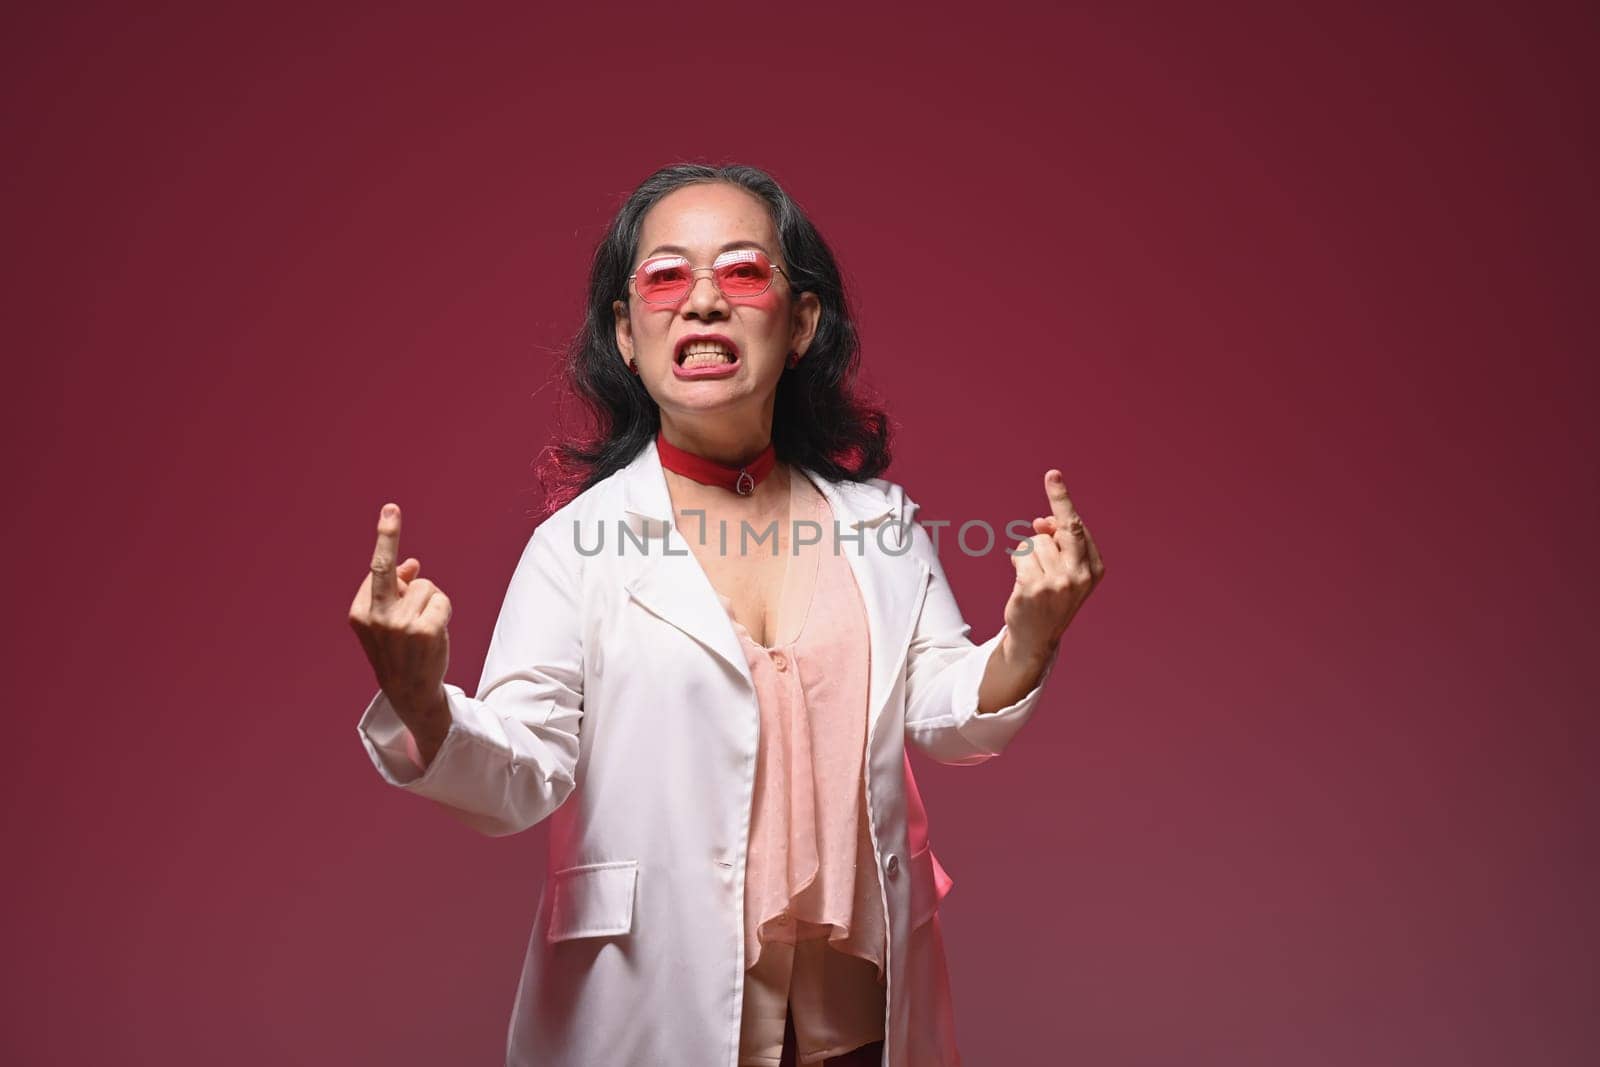 Studio shot of crazy funny mature woman showing middle finger gesture over red background.